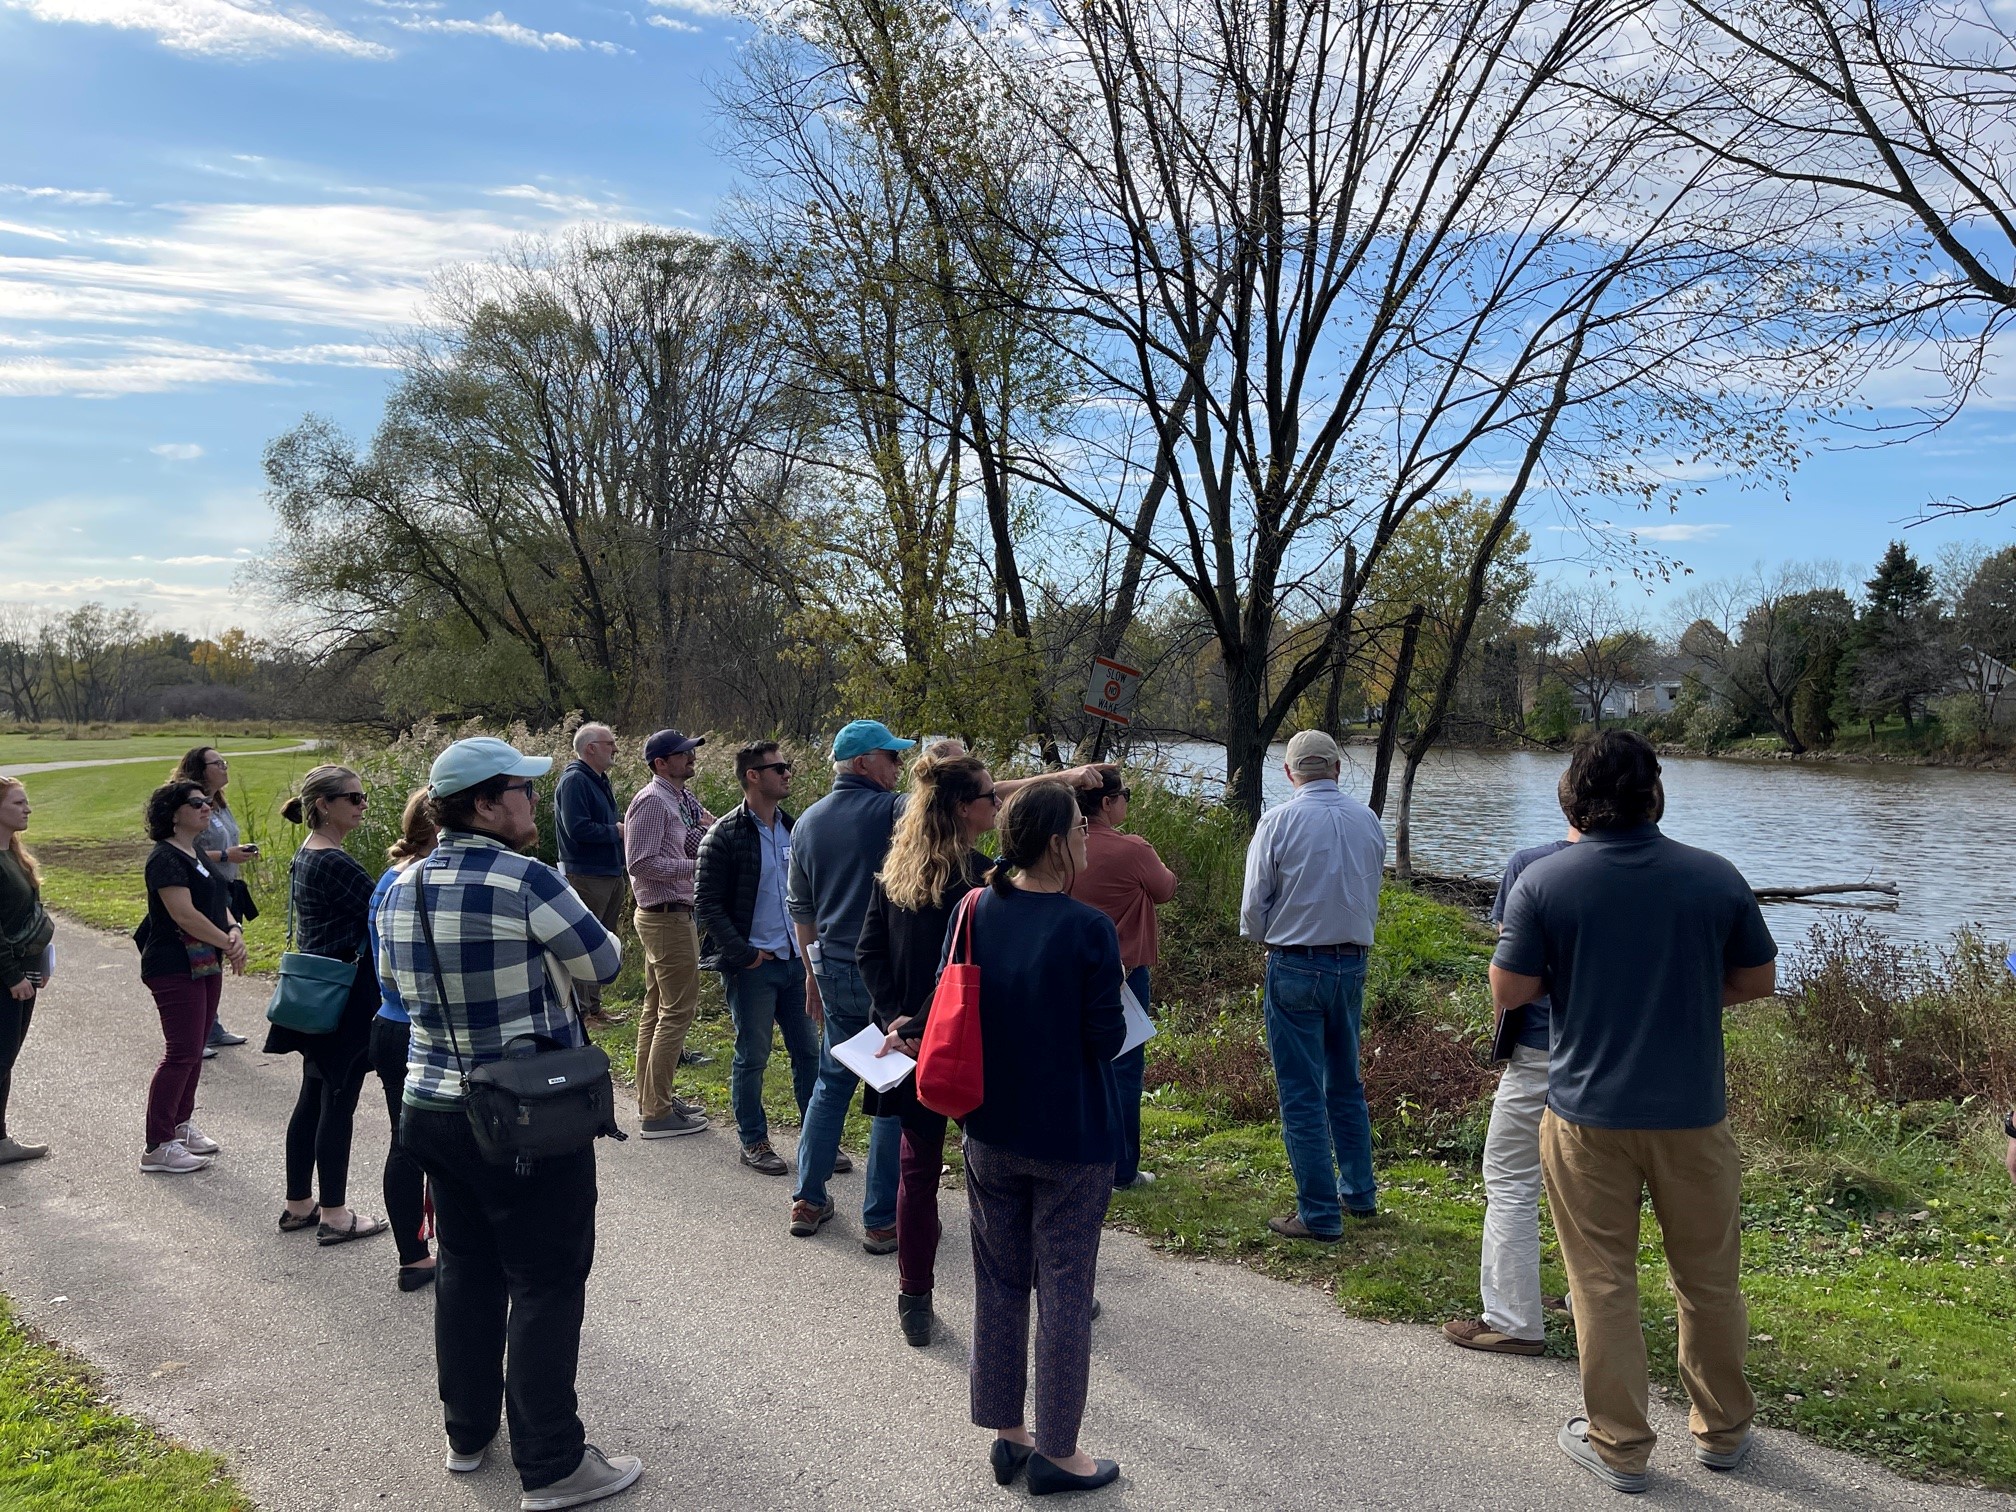 A group of people stand on a paved path alongside the East River in Green Bay near the site of worst flooding in 2019